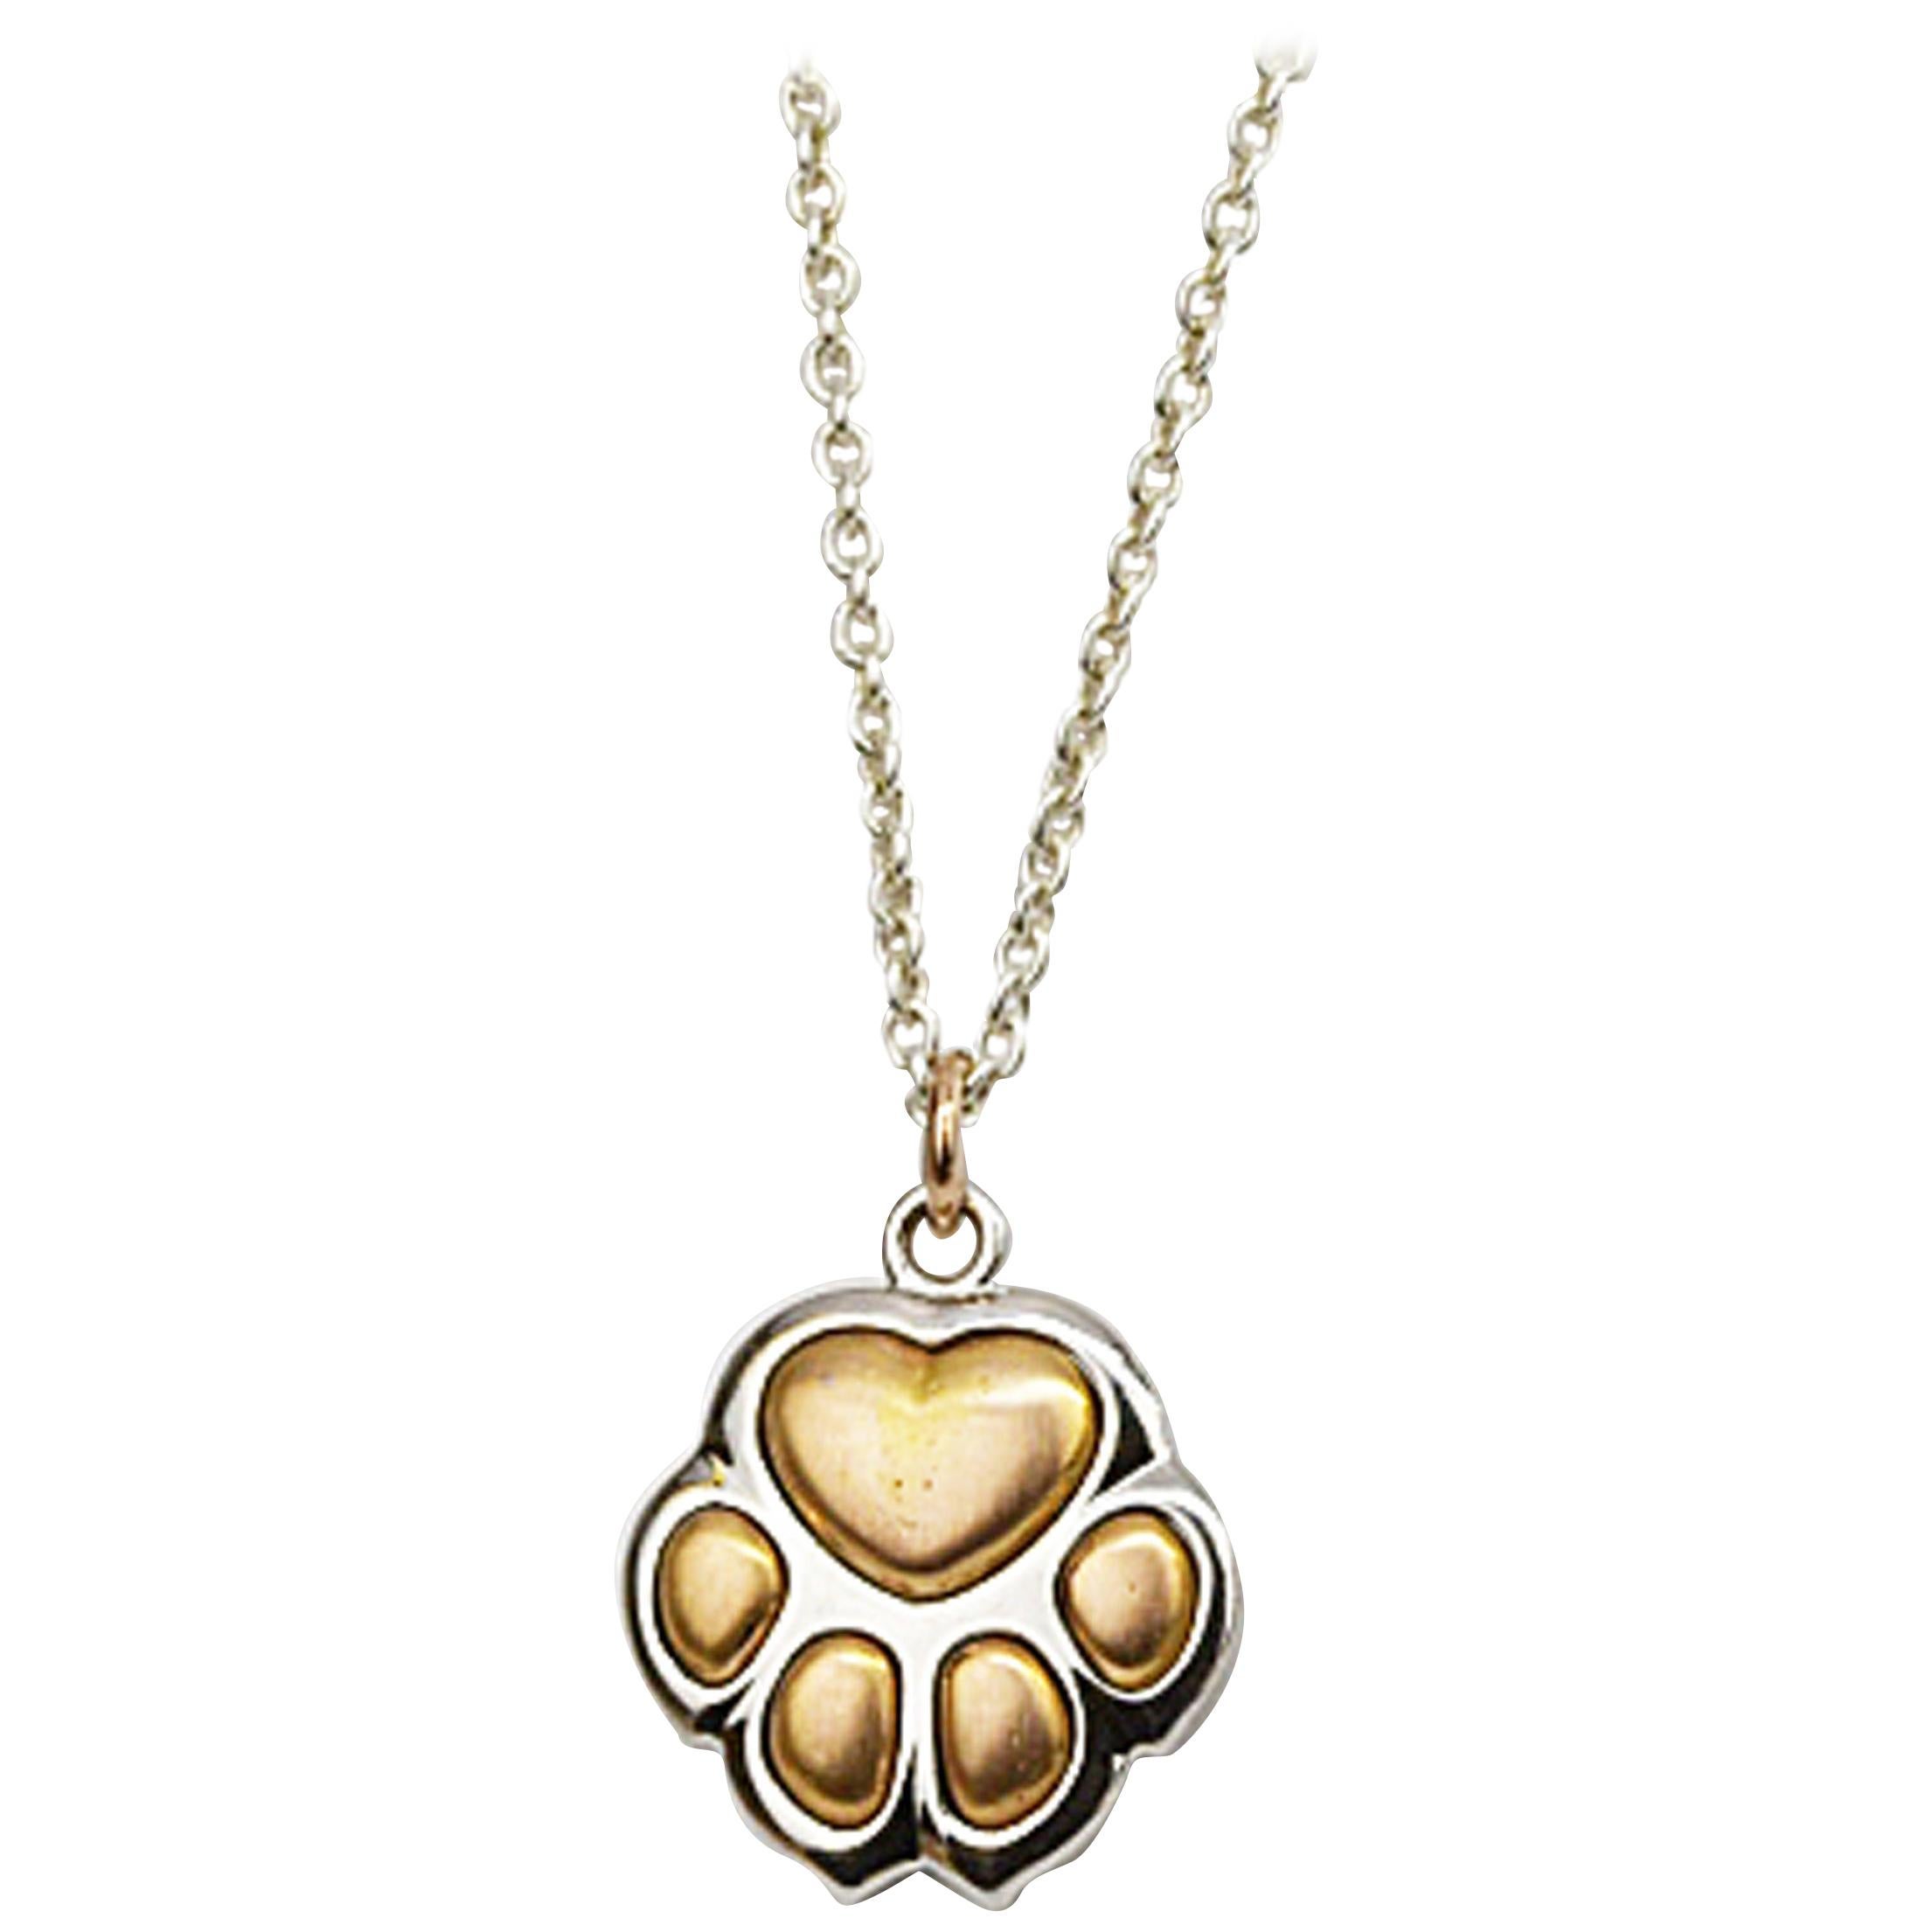 Matthew Cambery 18K White and Rose Gold Puppy Paw Pendant with Diamond Set Chain For Sale